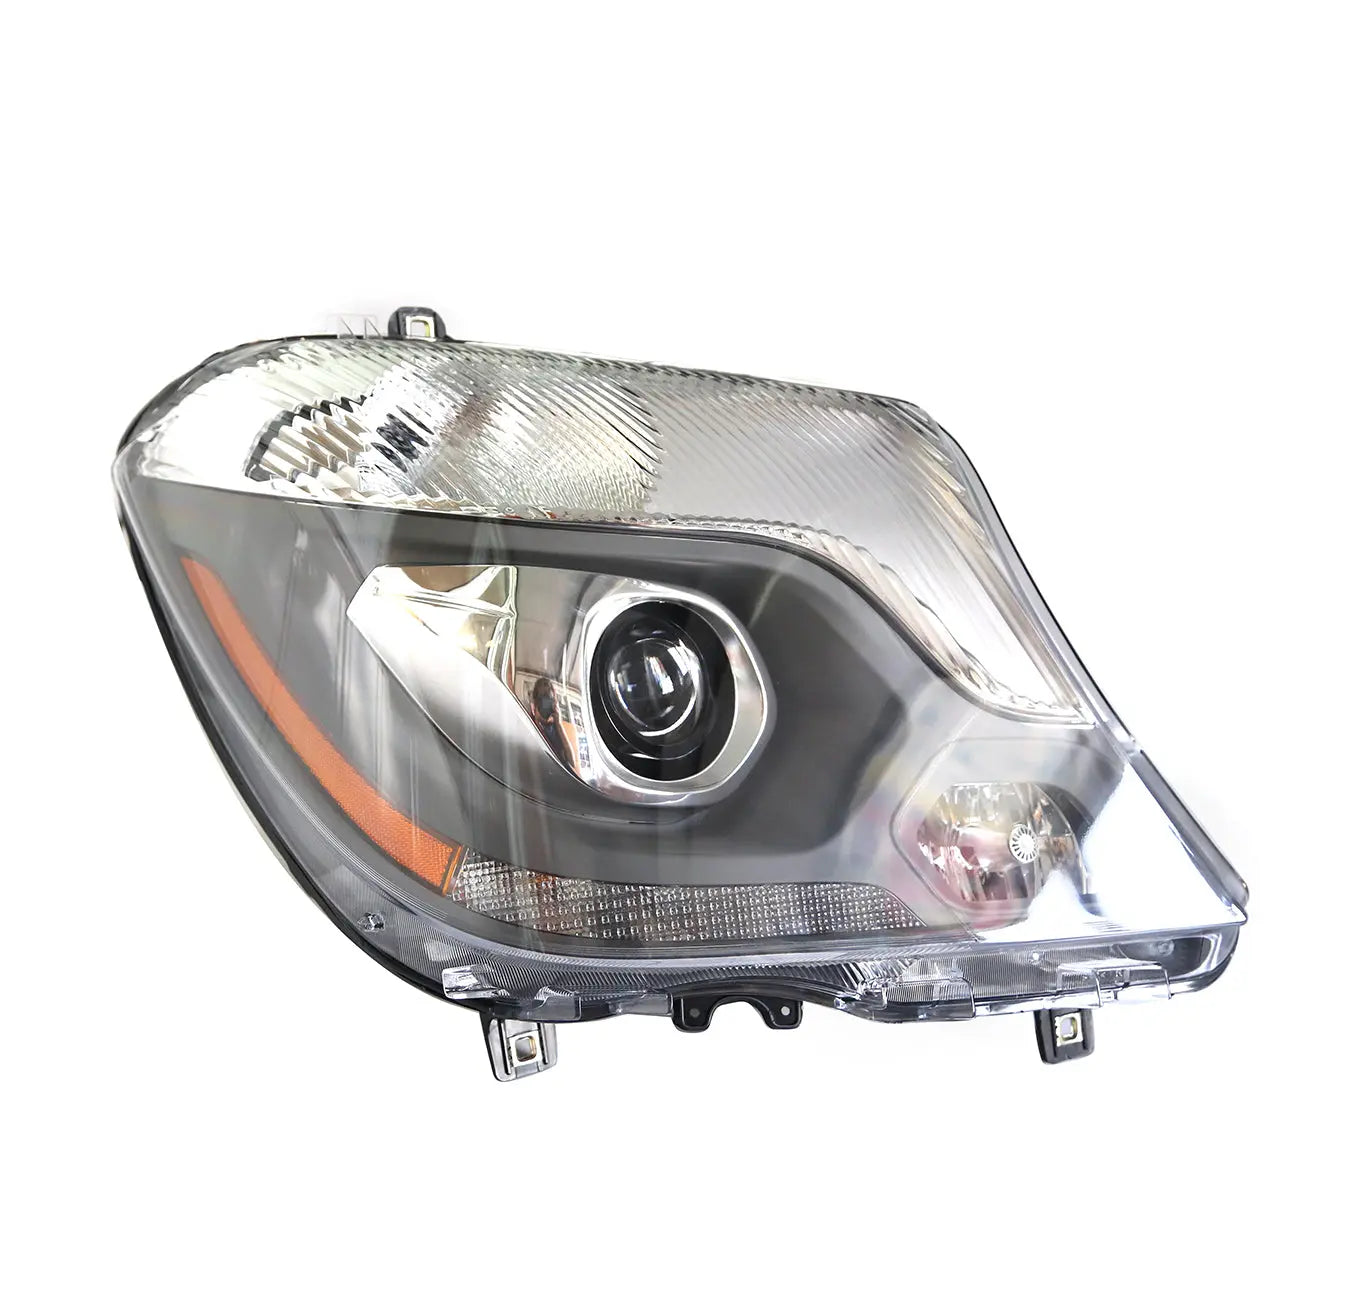 CHINA Factory Wholesale 9068203661 9068203761 HEAD LAMP For Mercedes FREIGHTLINER Sprinter 2010-2013 FANCHANTS China Auto Parts Wholesales